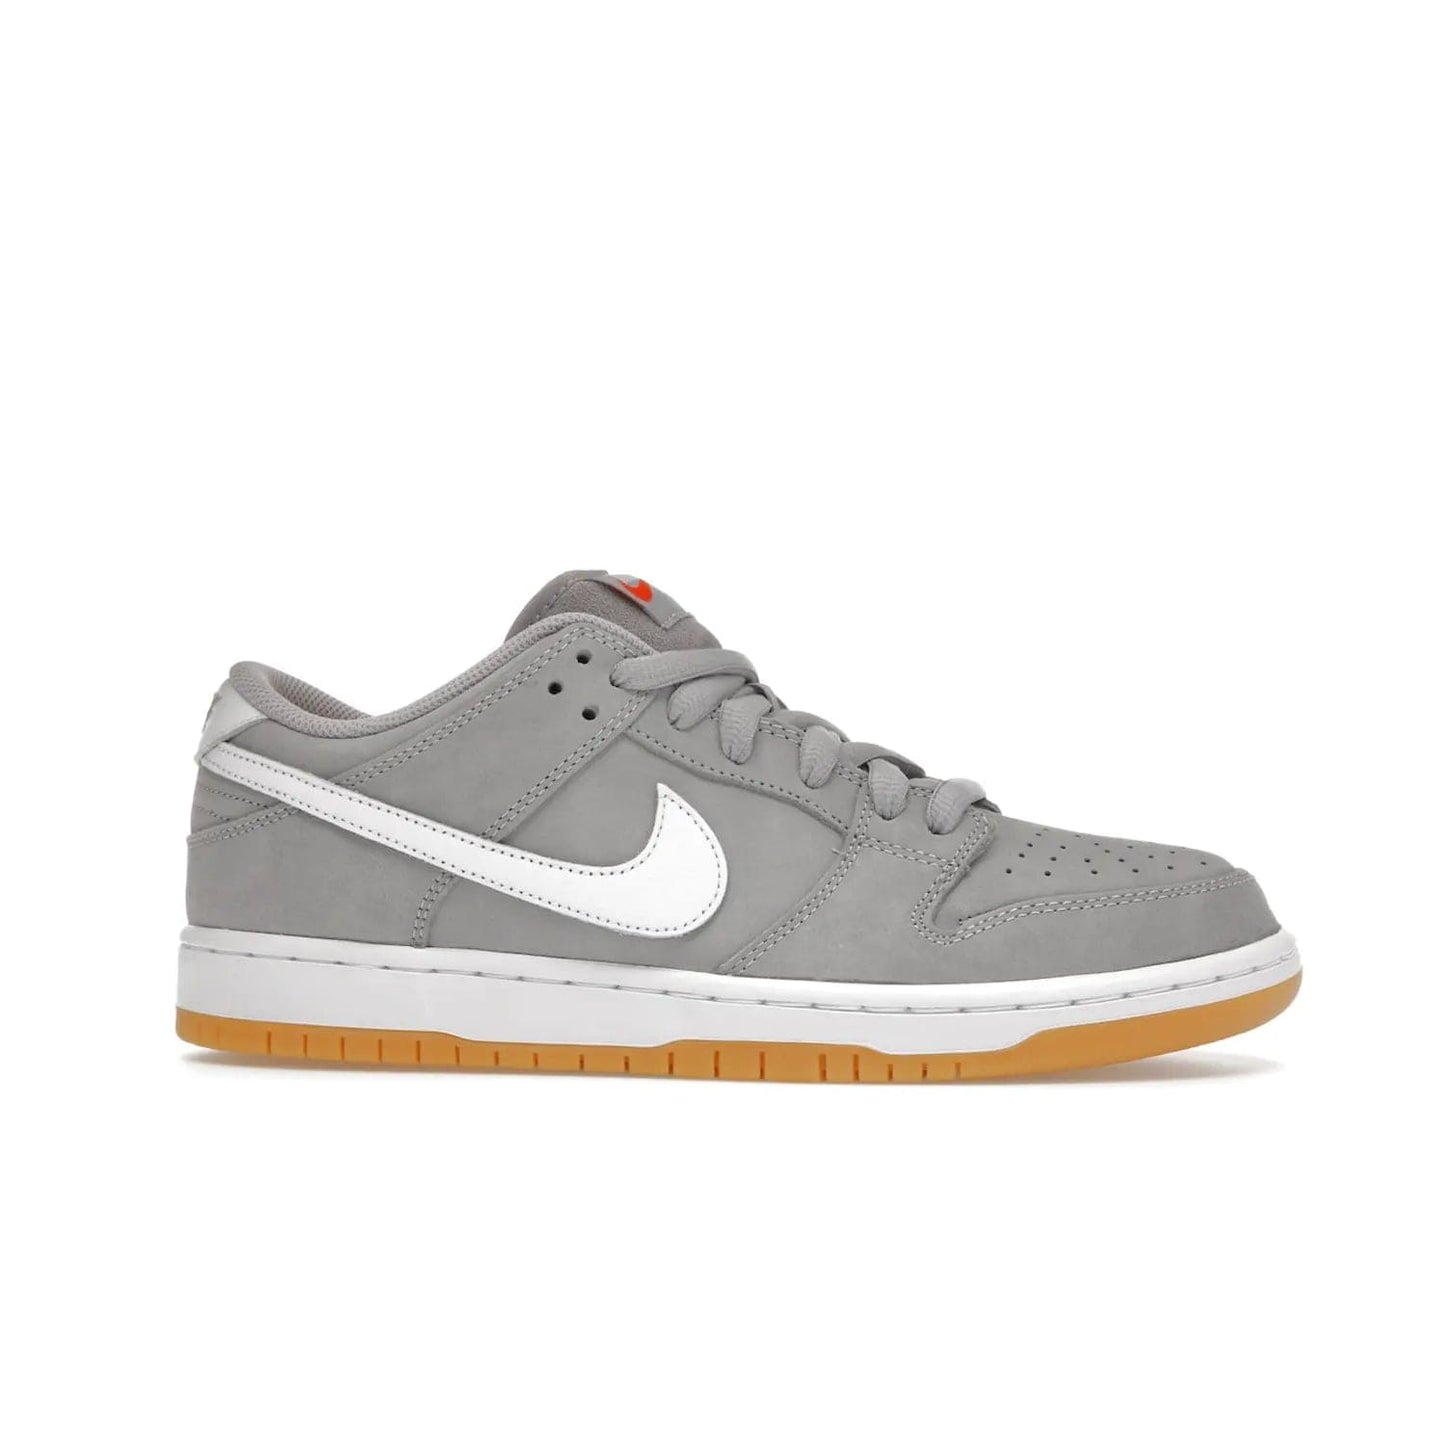 Nike SB Dunk Low Pro ISO Orange Label Wolf Grey Gum - Image 2 - Only at www.BallersClubKickz.com - Introducing Nike's SB Dunk Low Pro ISO Orange Label Wolf Grey Gum - a stylish shoe with a premium Wolf Grey upper, white leather Nike Swoosh, and an eye-catching gum outsole. With special Nike branding and packaging, this shoe adds a unique fashion statement. Out Feb. 24, 2023.